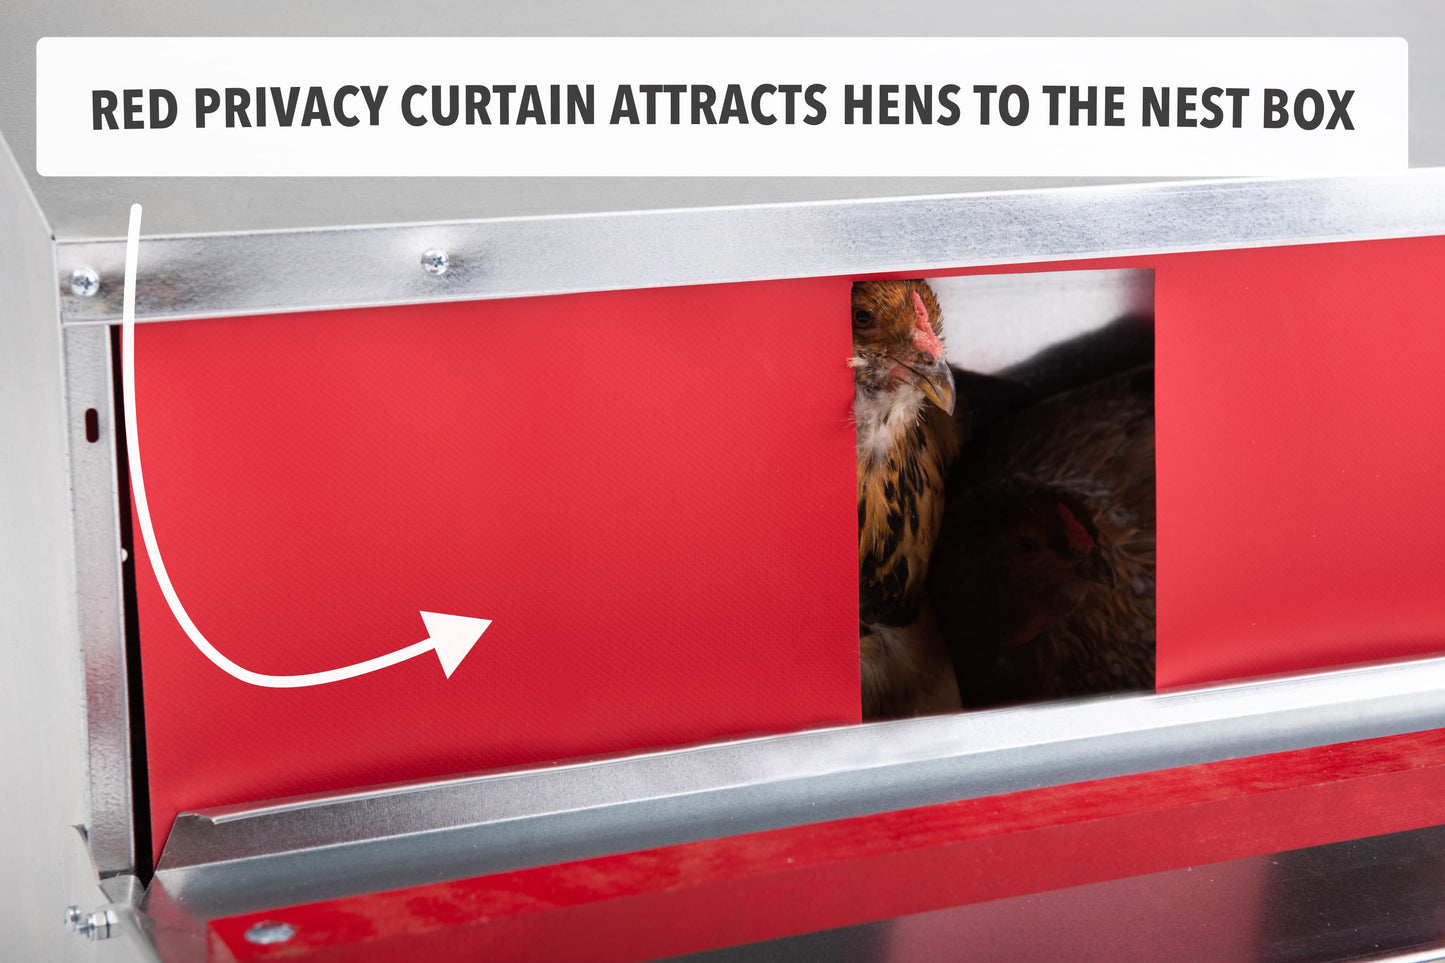 
                  
                    Large (54") - Reversible Rollout Nest Box (Up to 52 Hens) - Ready to Ship! - Limited Supply!
                  
                